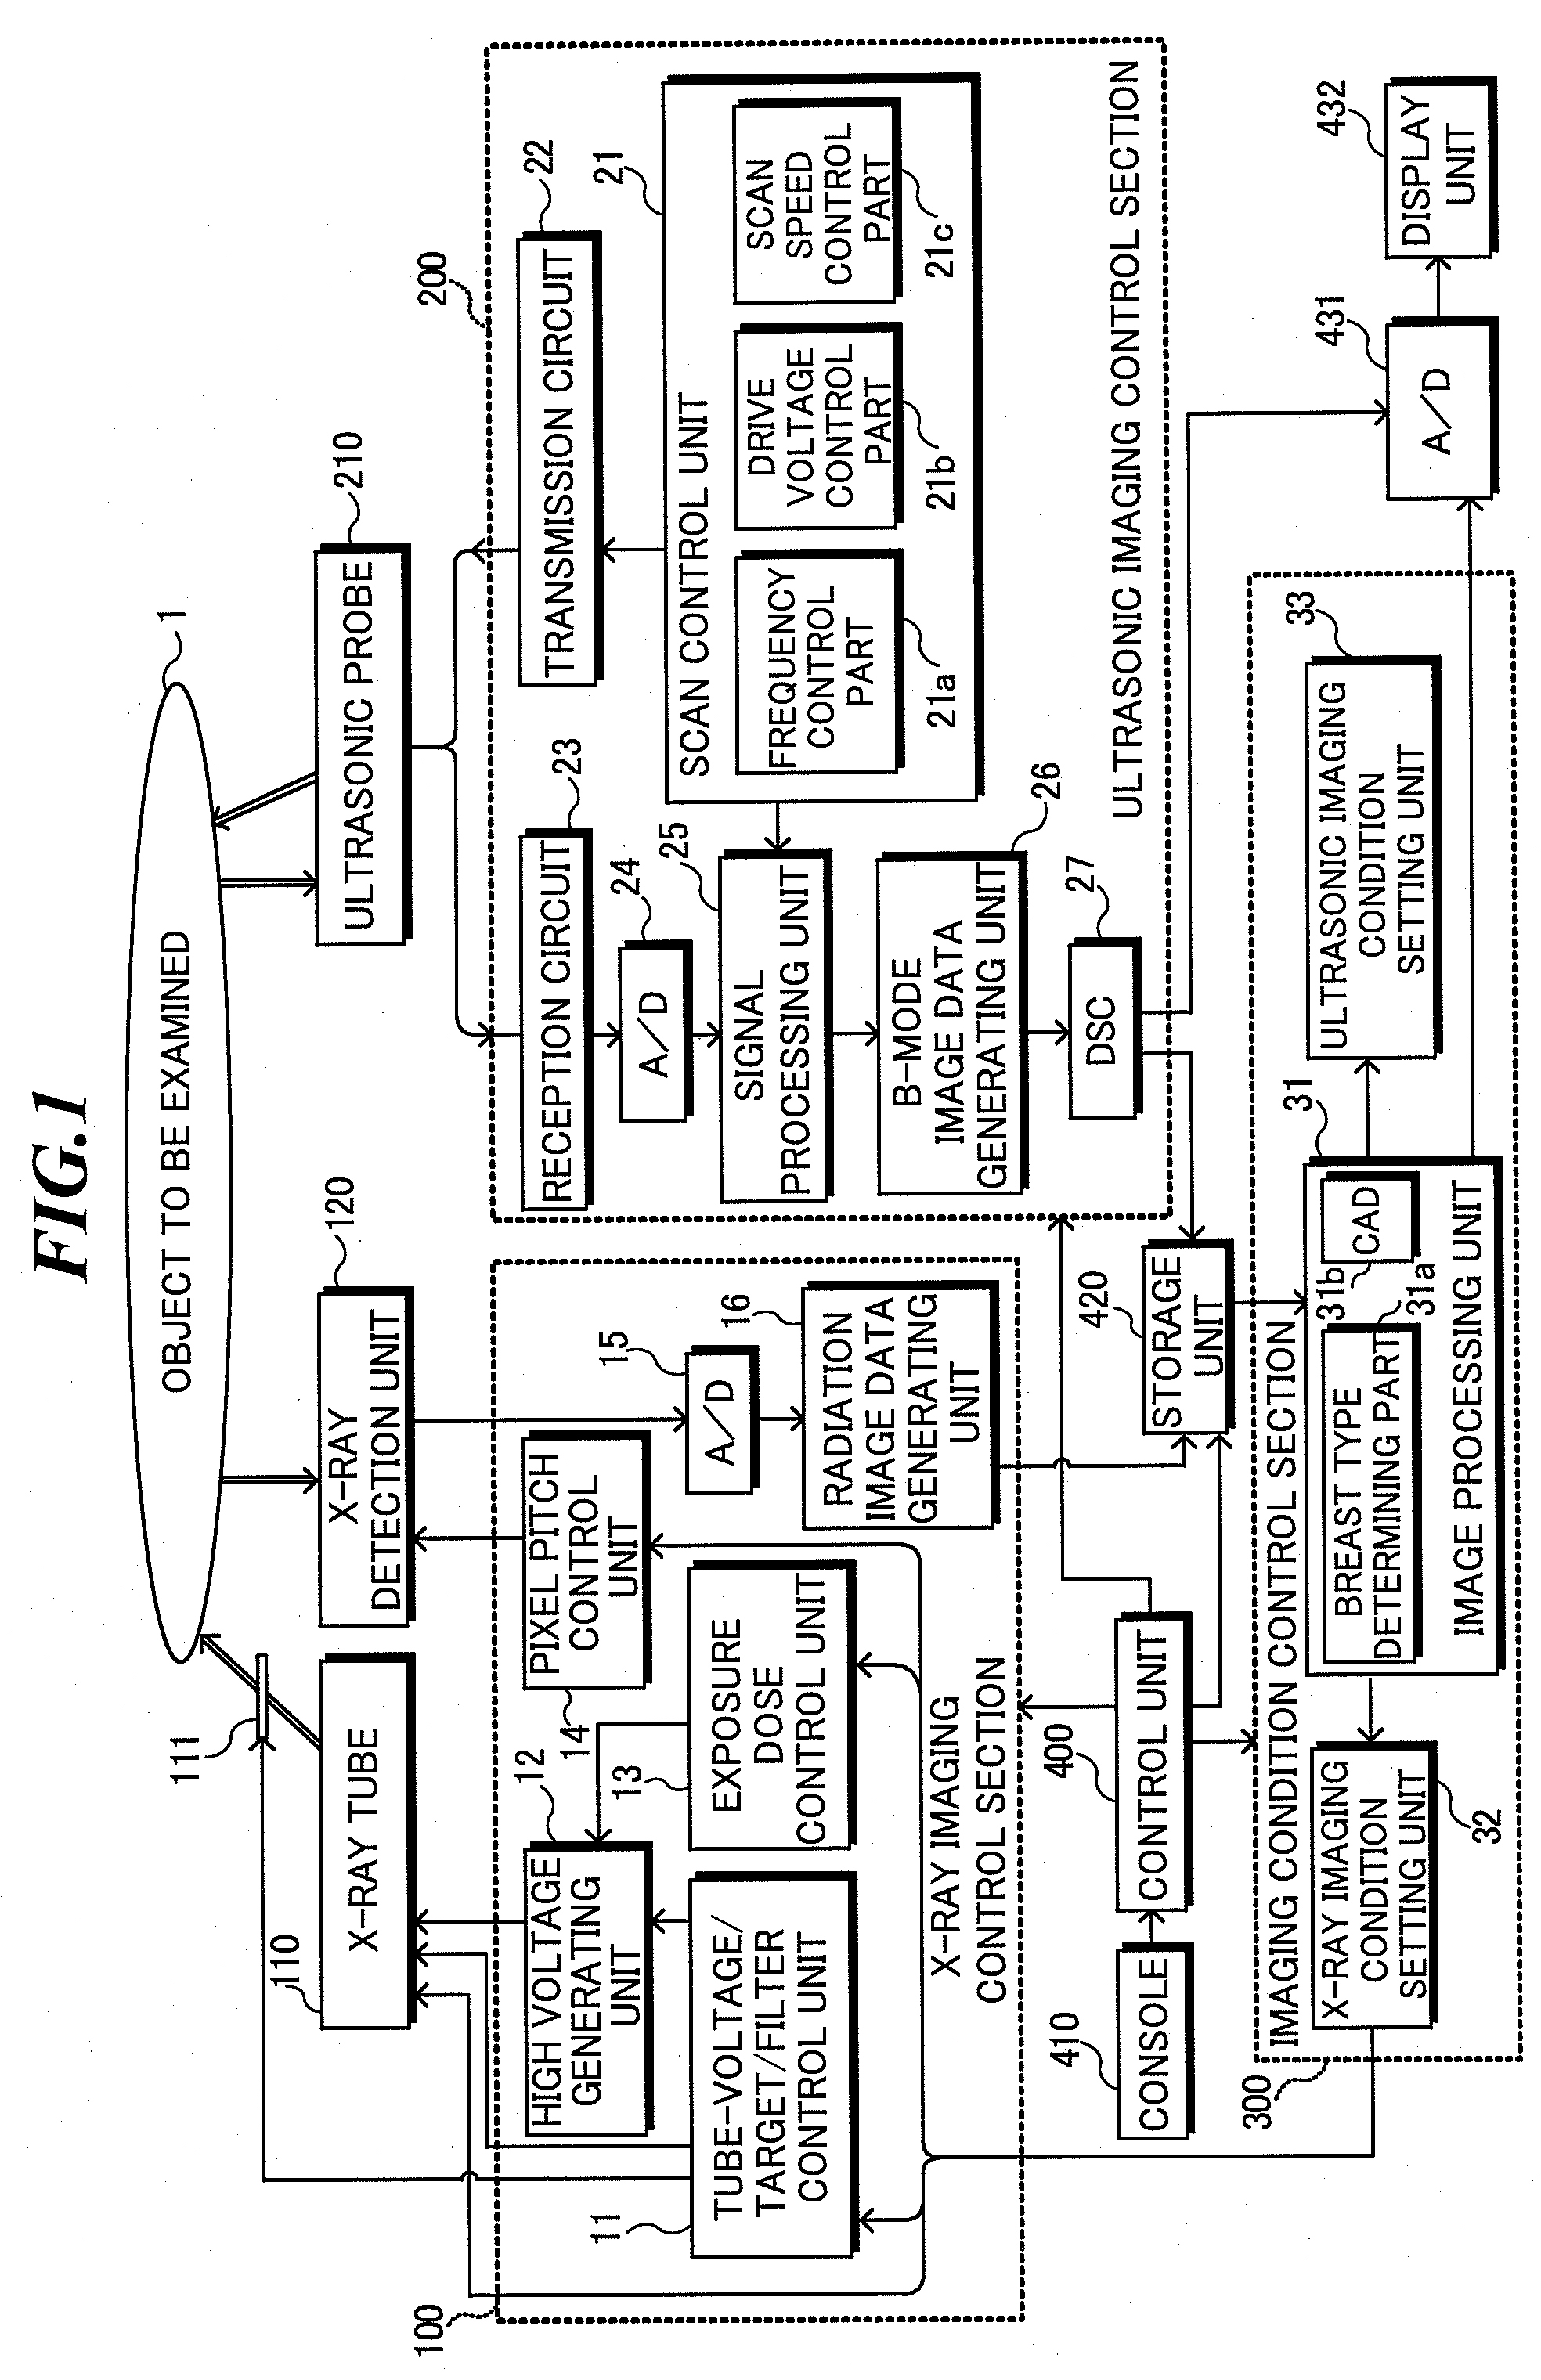 Medical imaging system and method